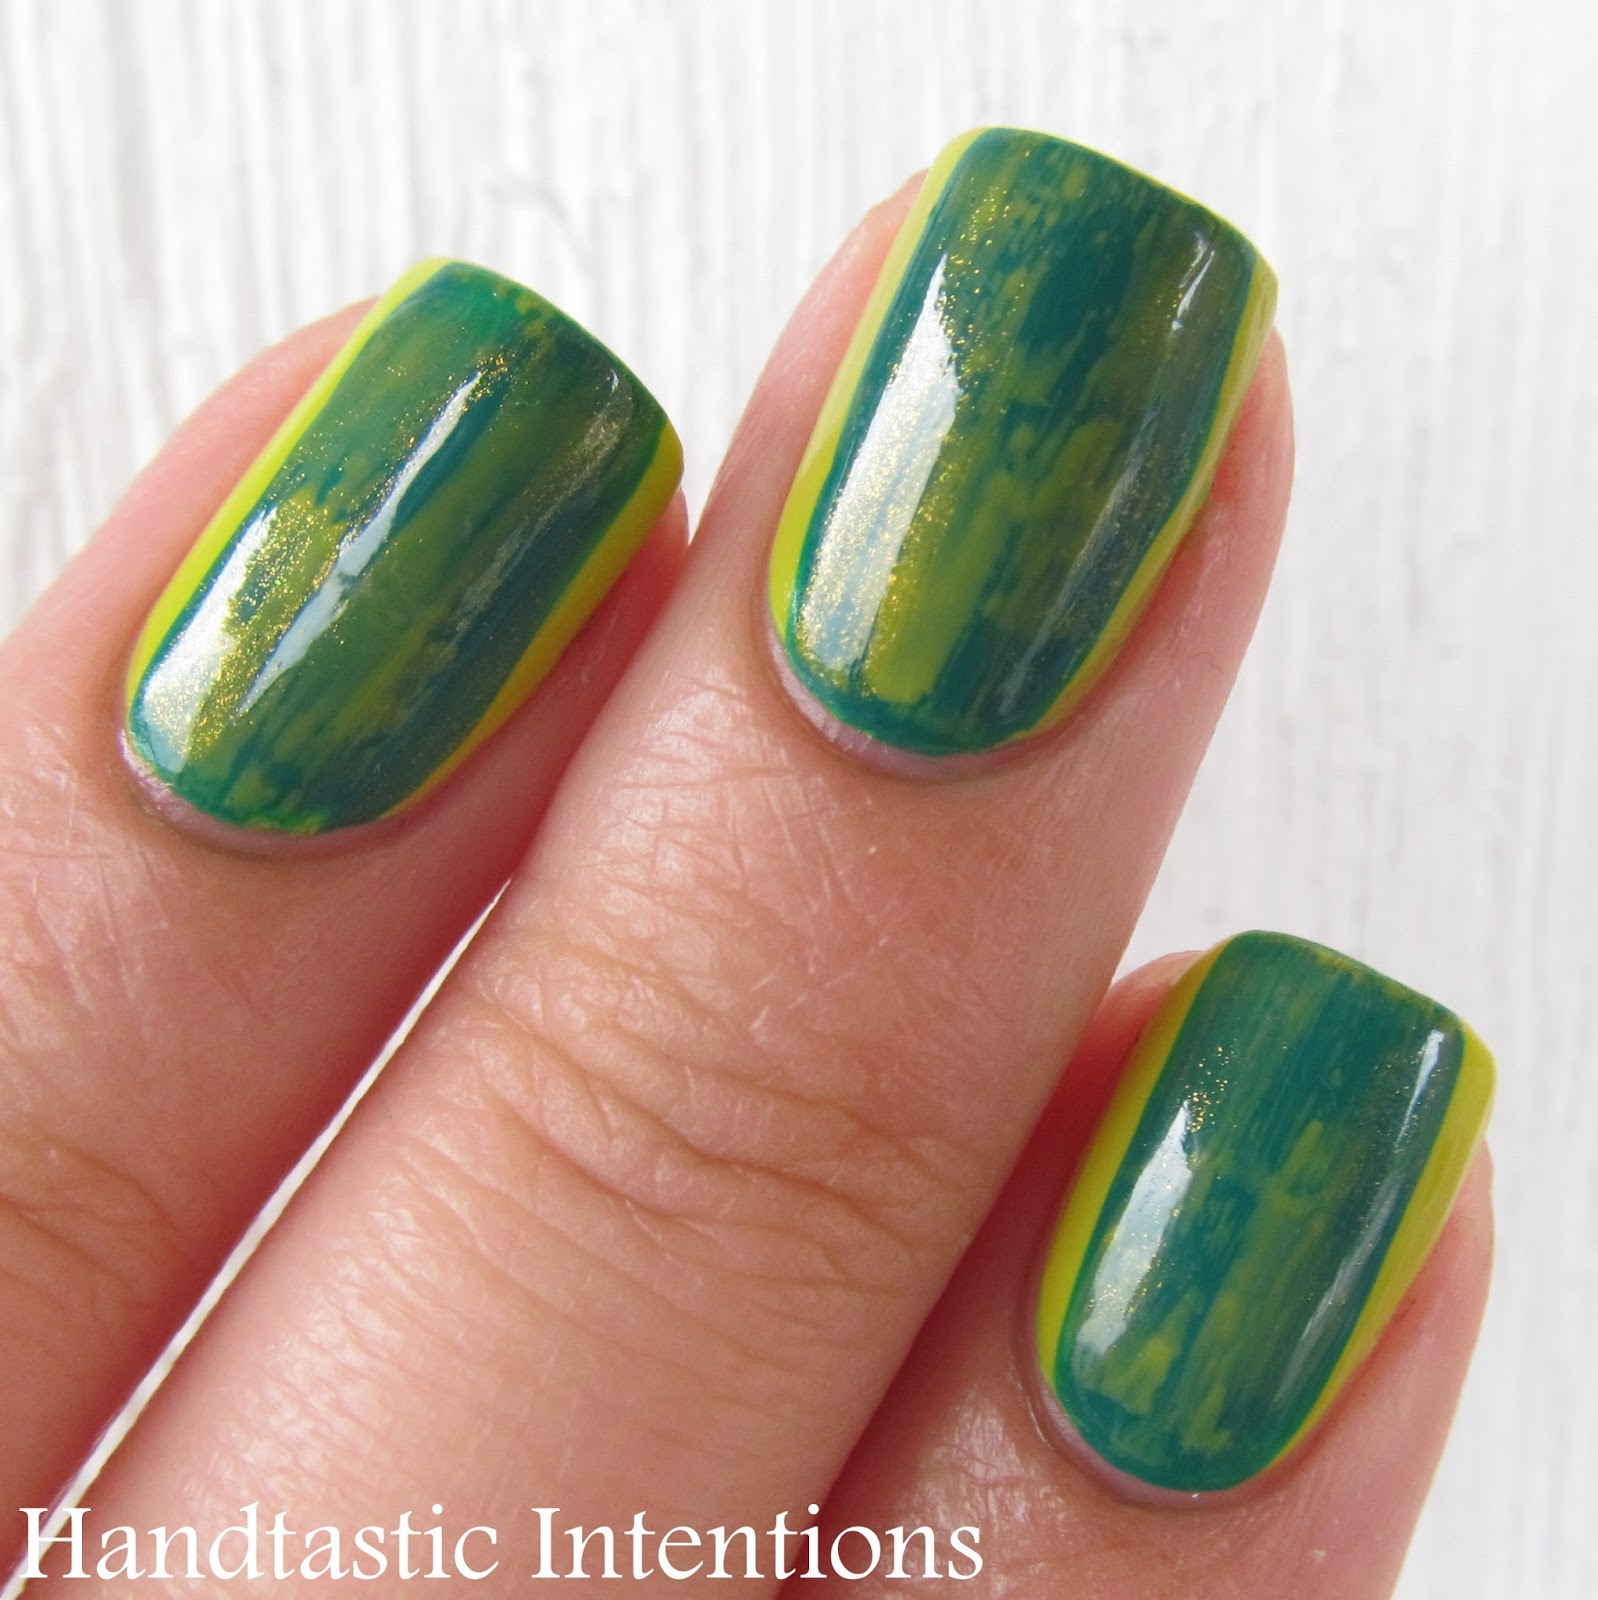 Handtastic Intentions: Nail Art: Plant Inspired